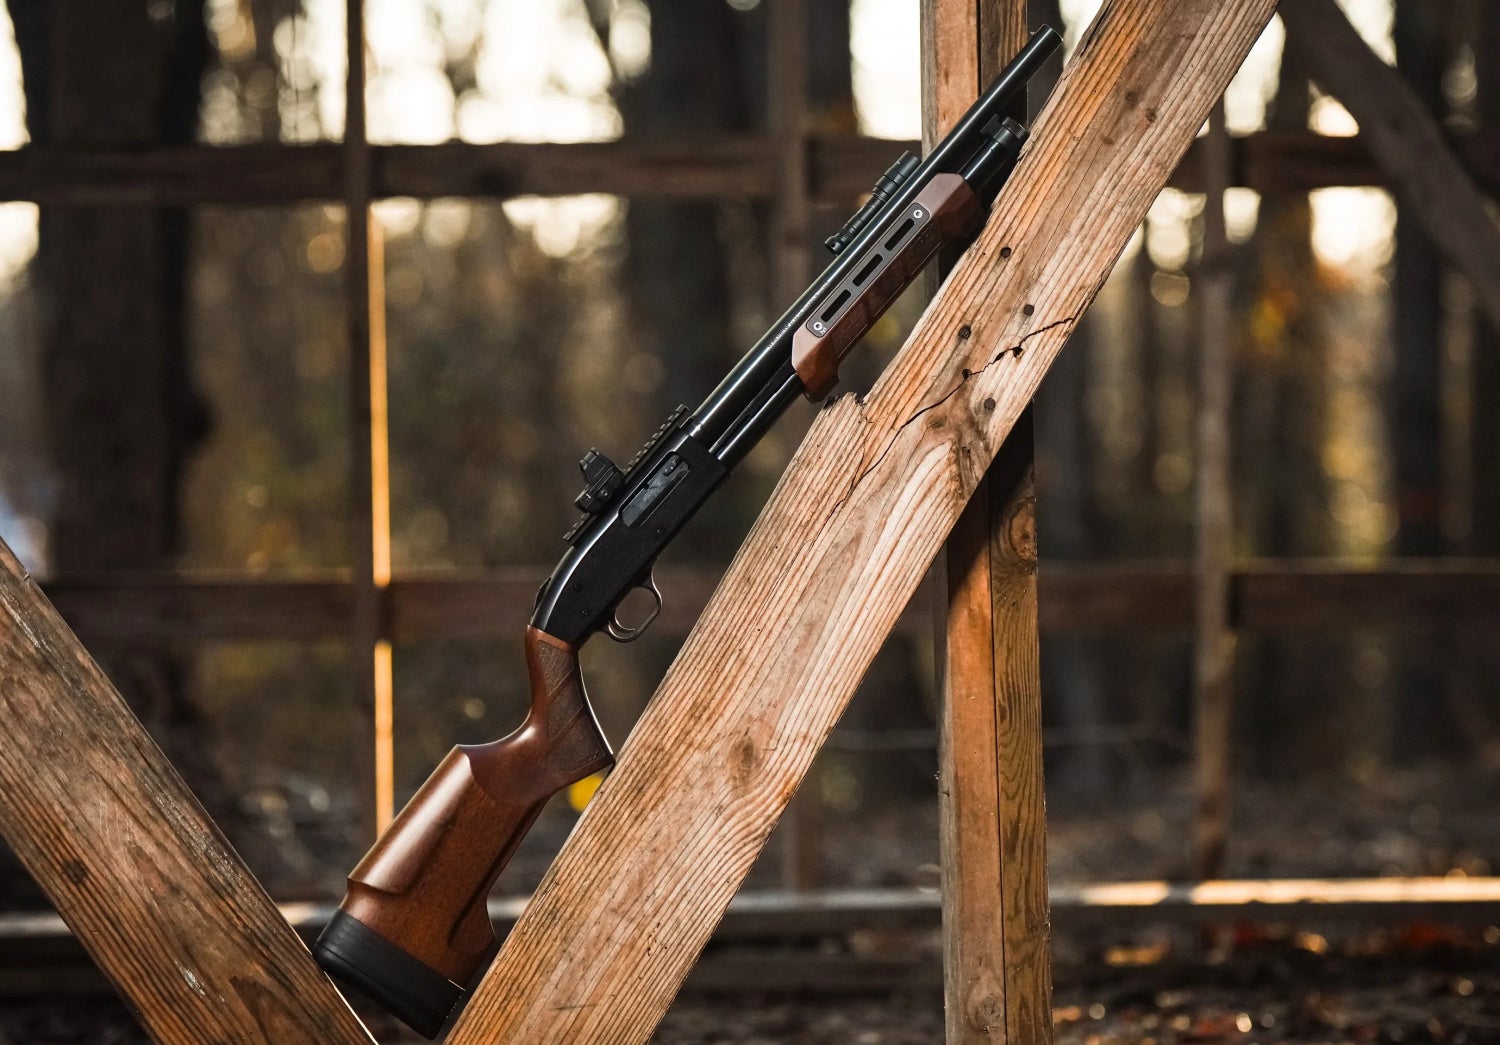 WOOX Introduces the Gladiatore Furniture for Mossberg Pump Shotguns